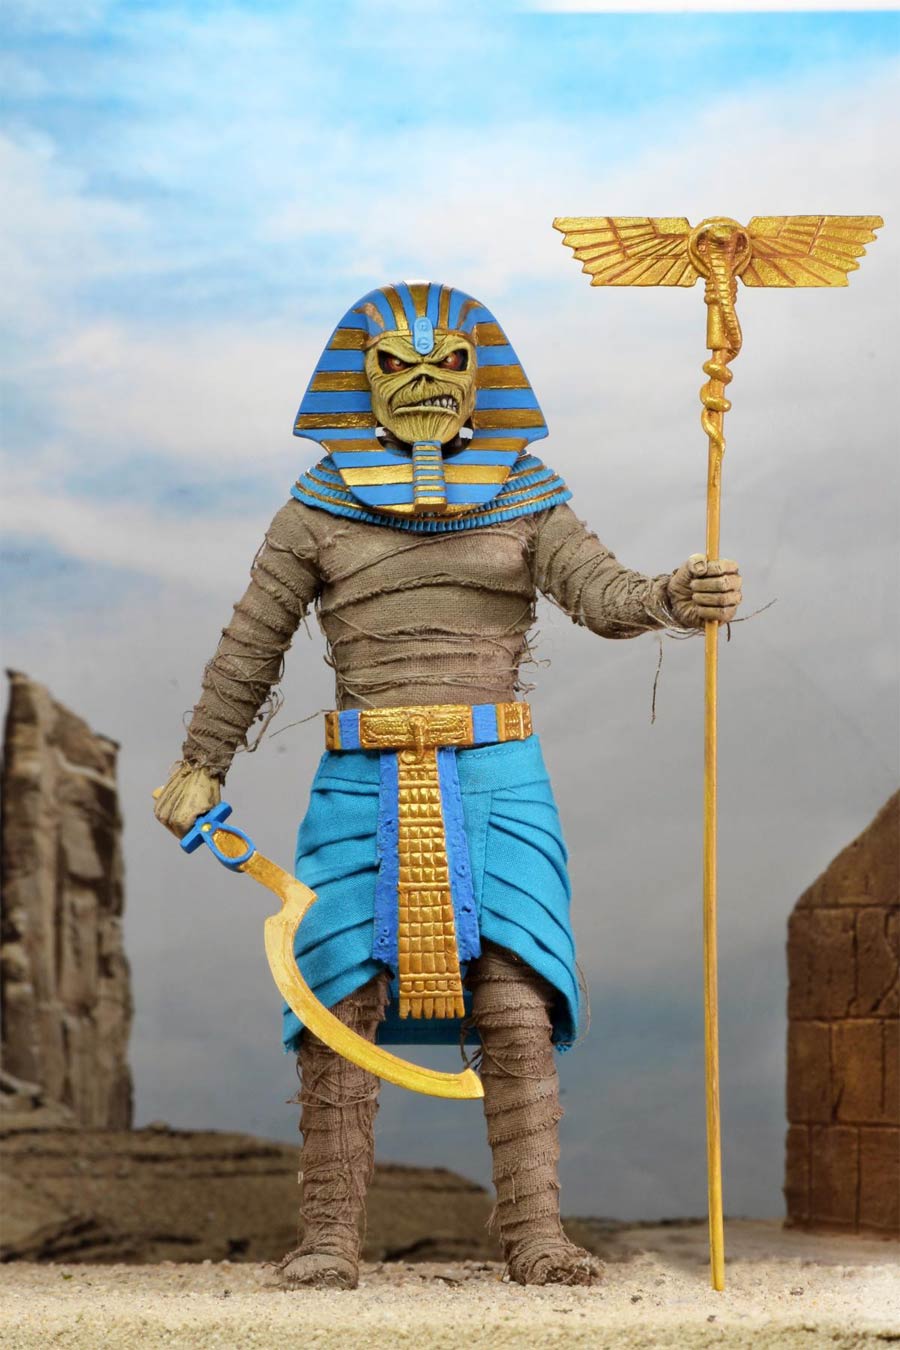 Iron Maiden Pharaoh Eddie Clothed 8-Inch Action Figure